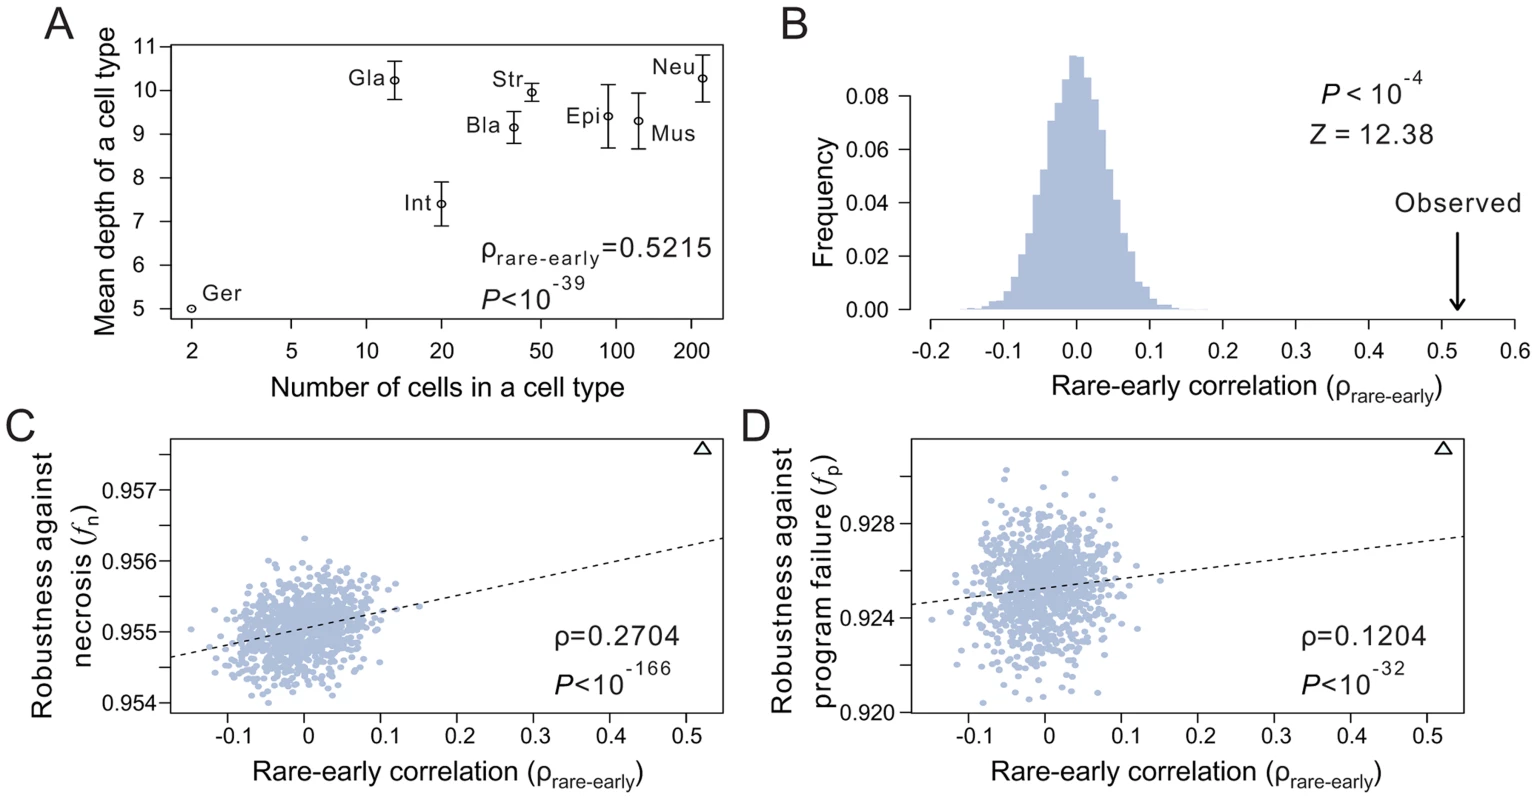 The tendency for rare cells to have low depths improves the robustness of the <i>C. elegans</i> lineage.